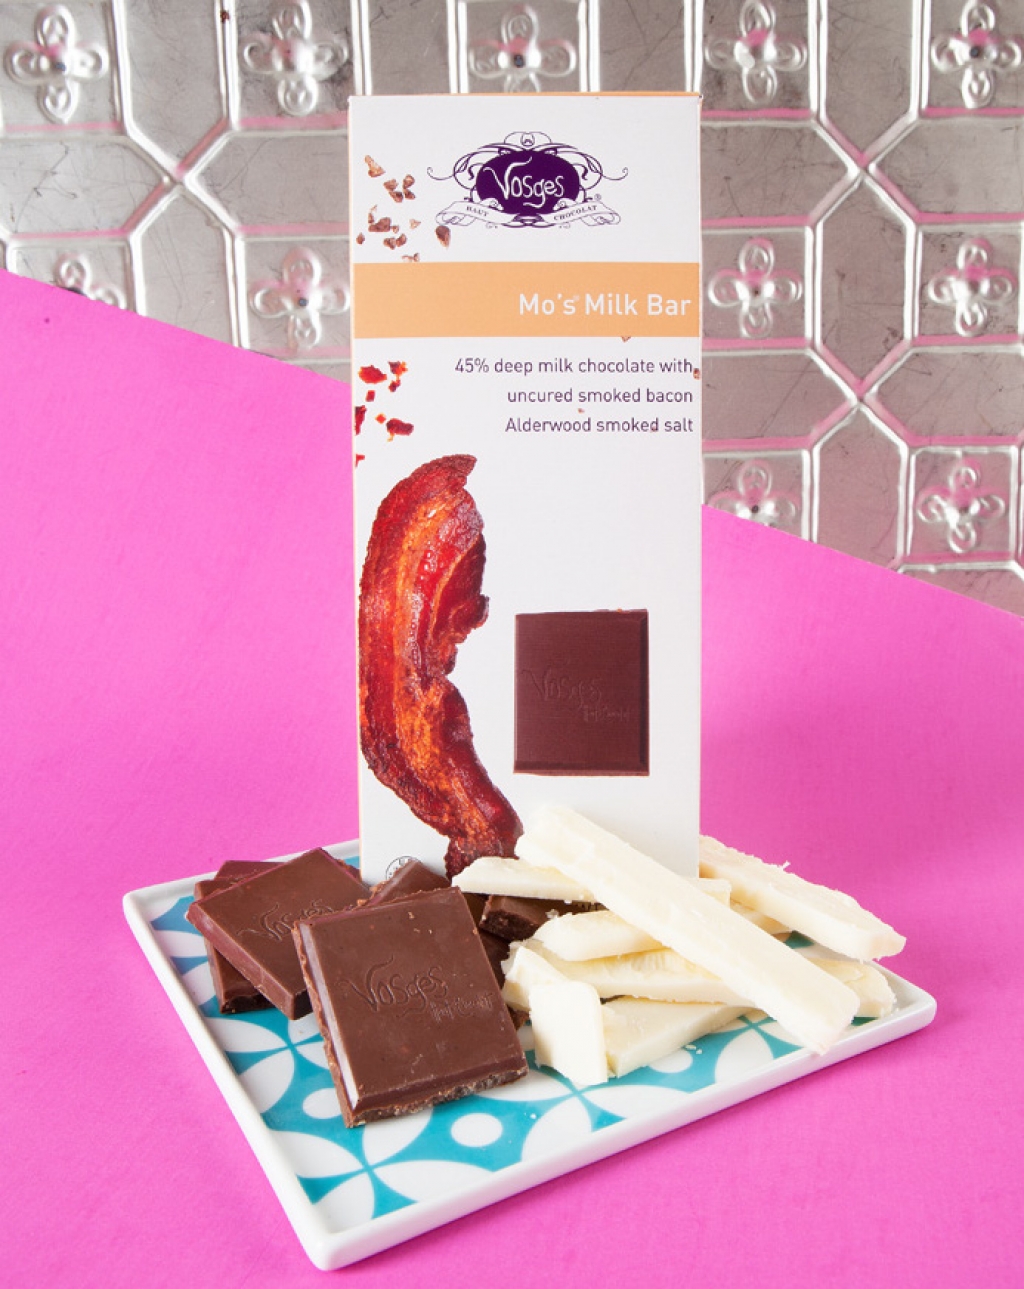 Beecher's Flagship Cheddar and Vosges Mo’s Milk Bar